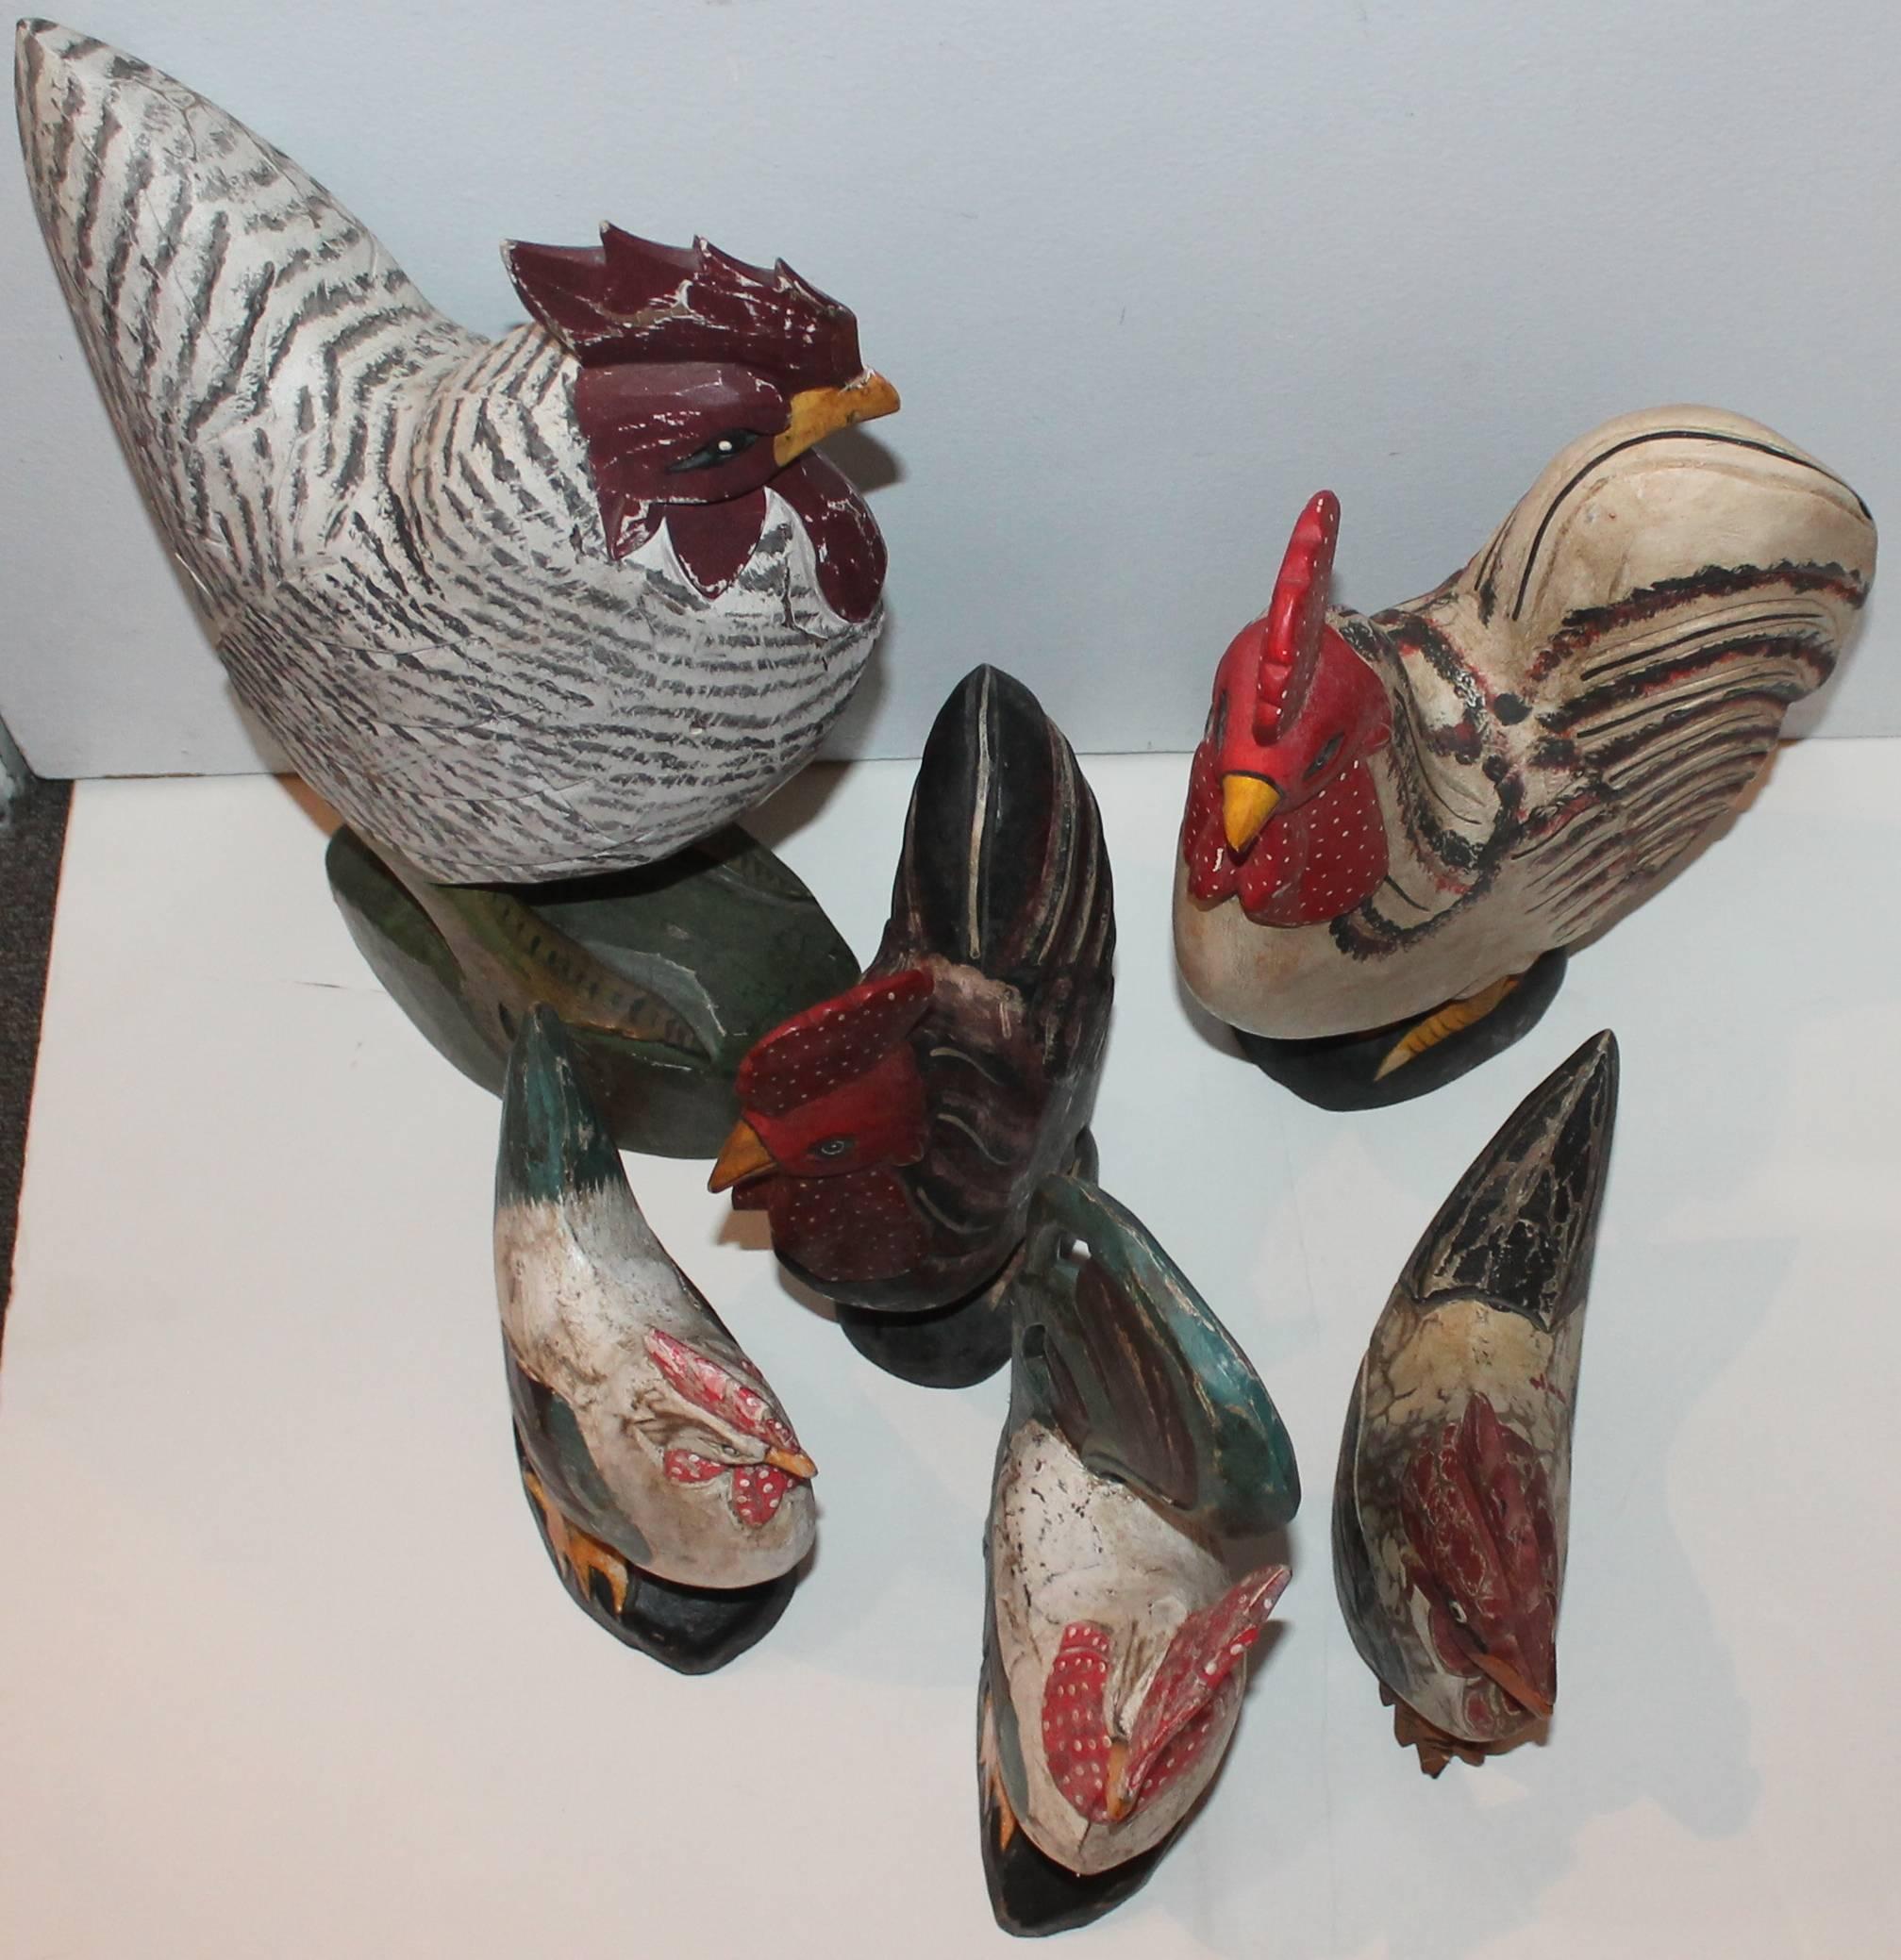 Wood Collection of Six Folk Art Hand-Carved and Painted Roosters